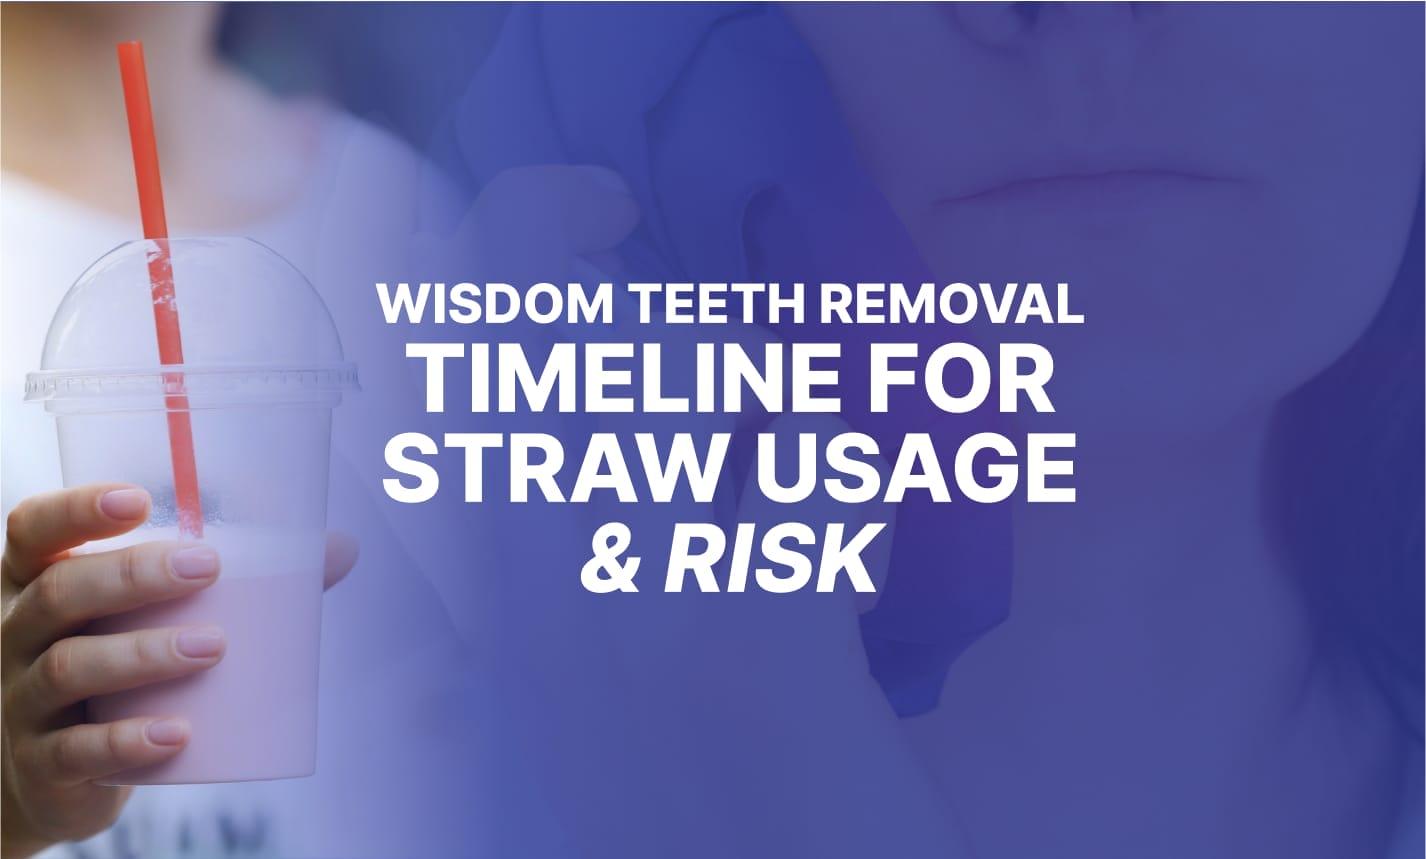 When Can I Use a Straw After Wisdom Teeth Removal?